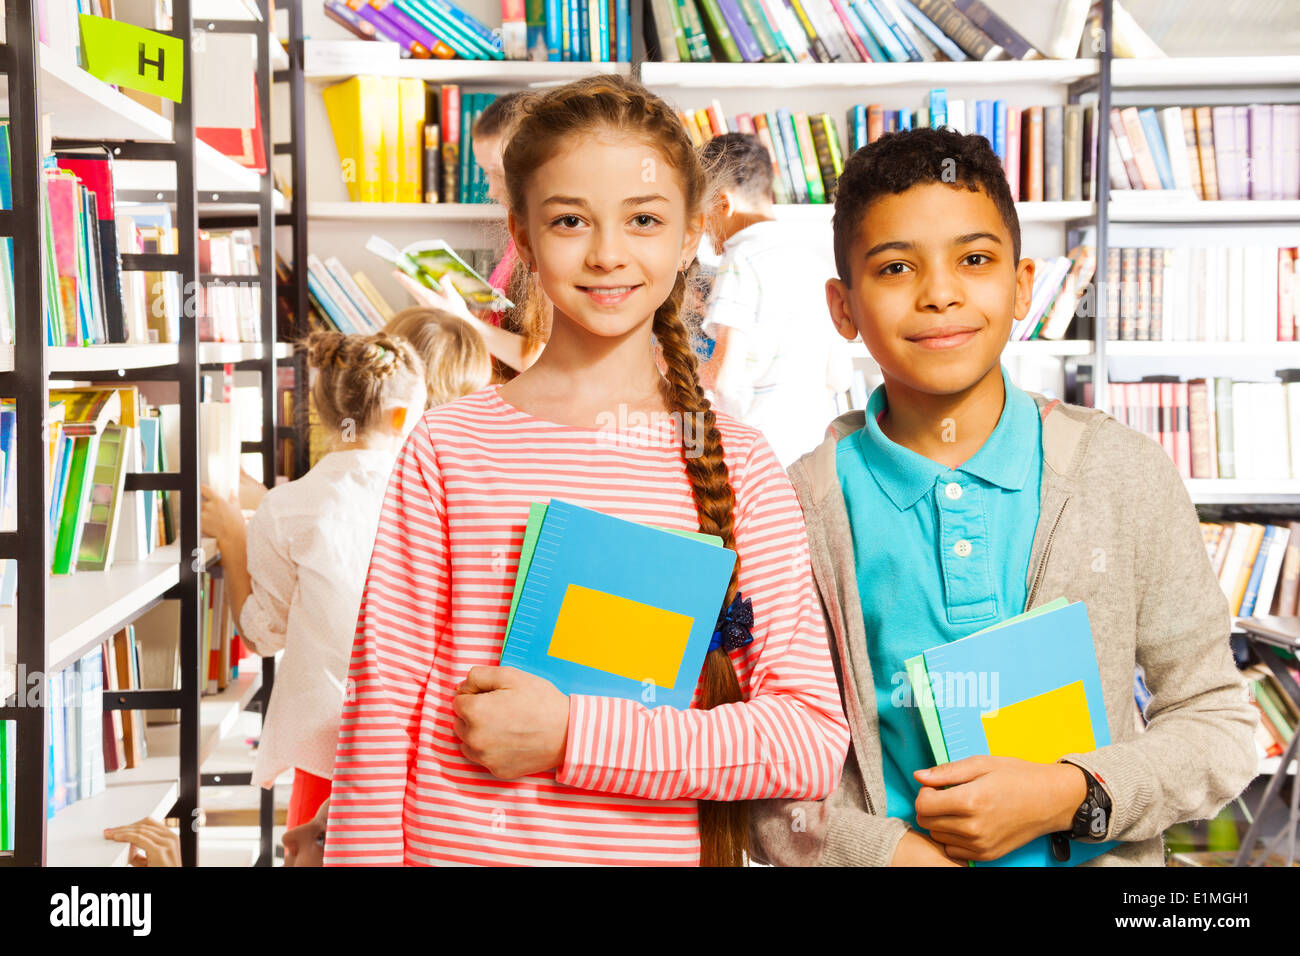 Girl and boy with books standing in library Stock Photo